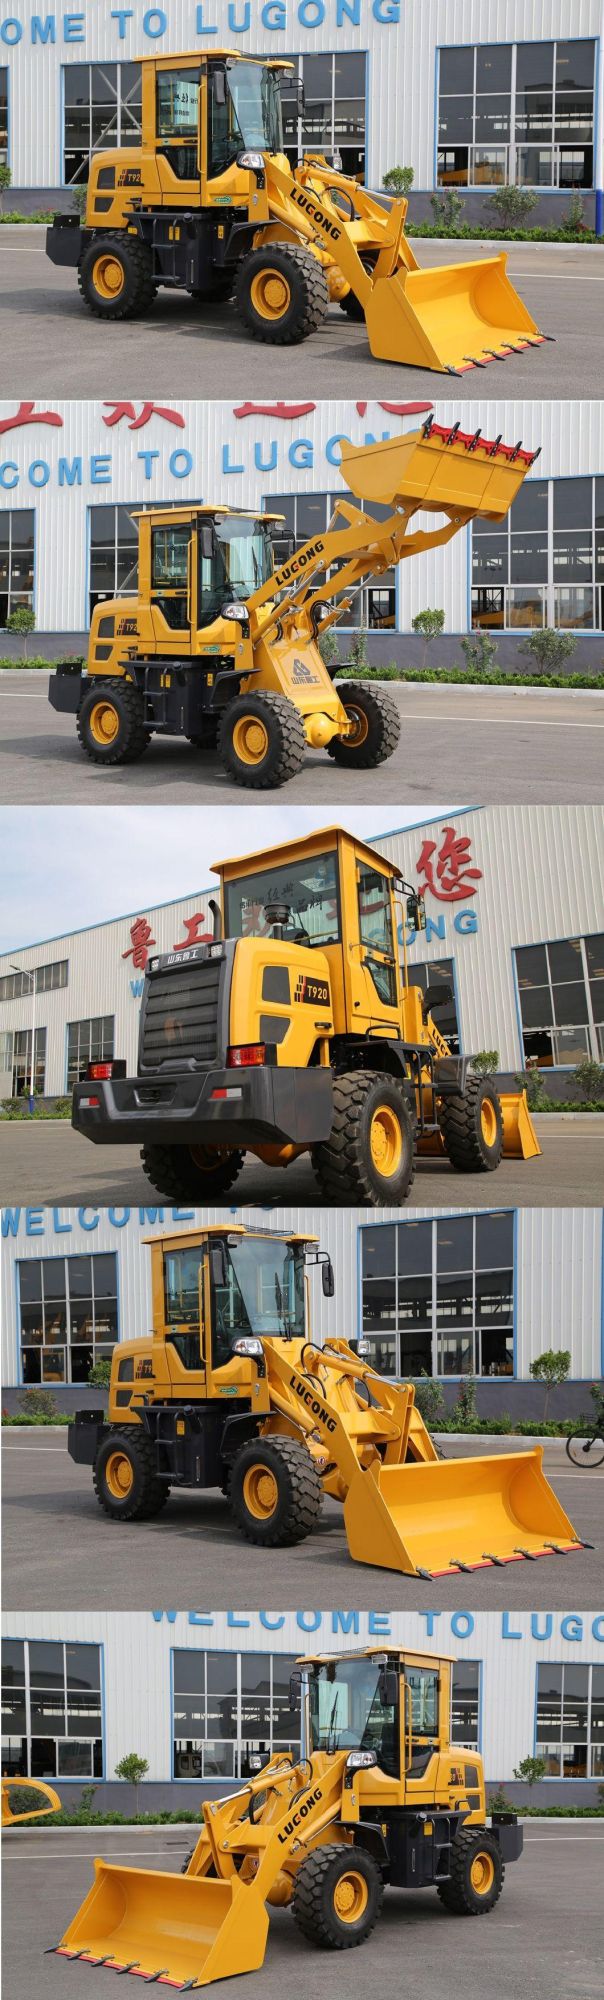 Lugong Small Wheel Loader with 4 Wheel Drive for Agricultural